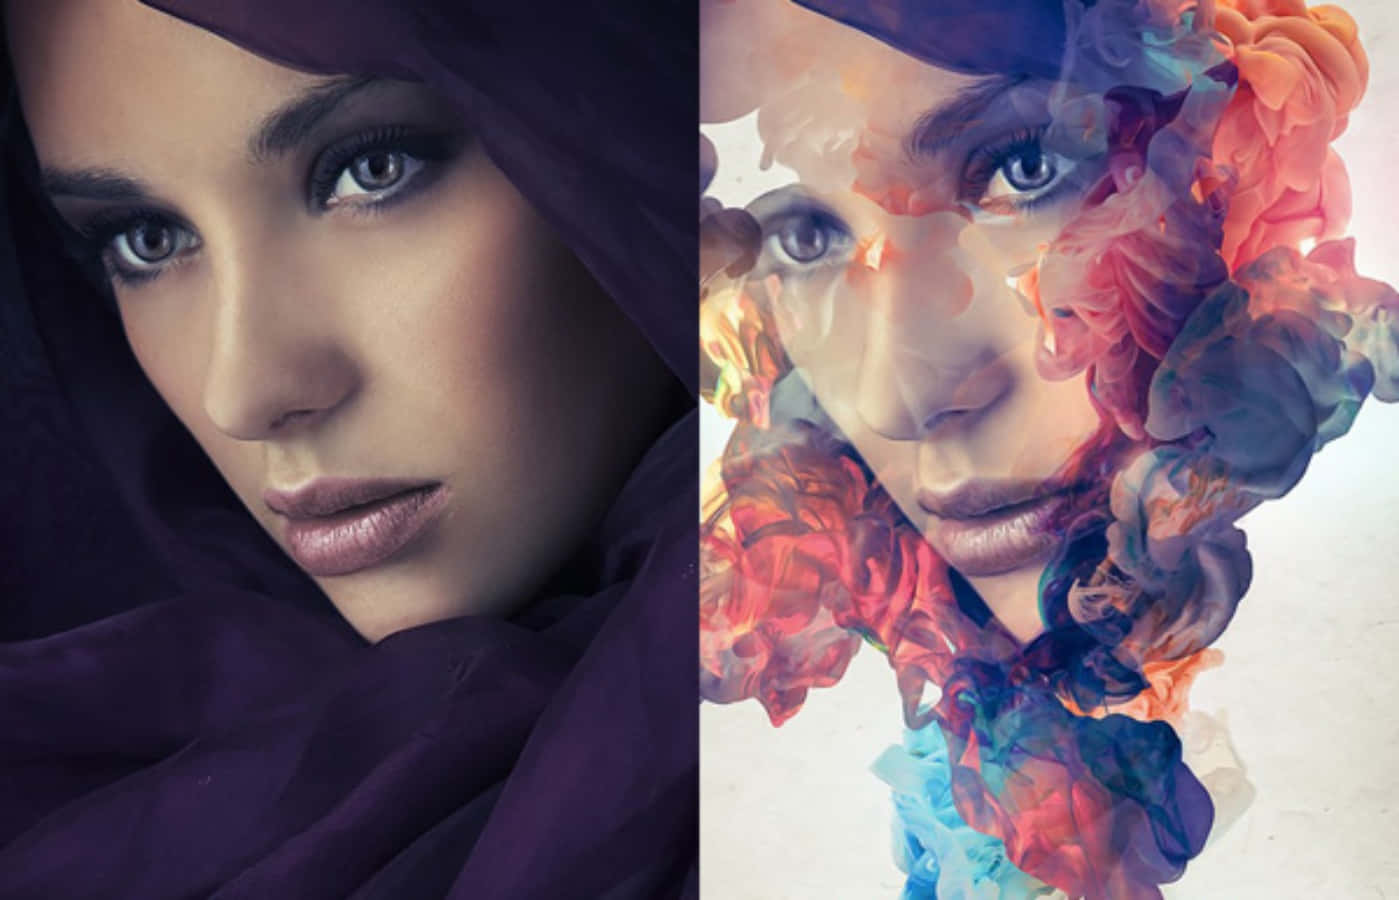 Explore Your Imagination with Photoshop